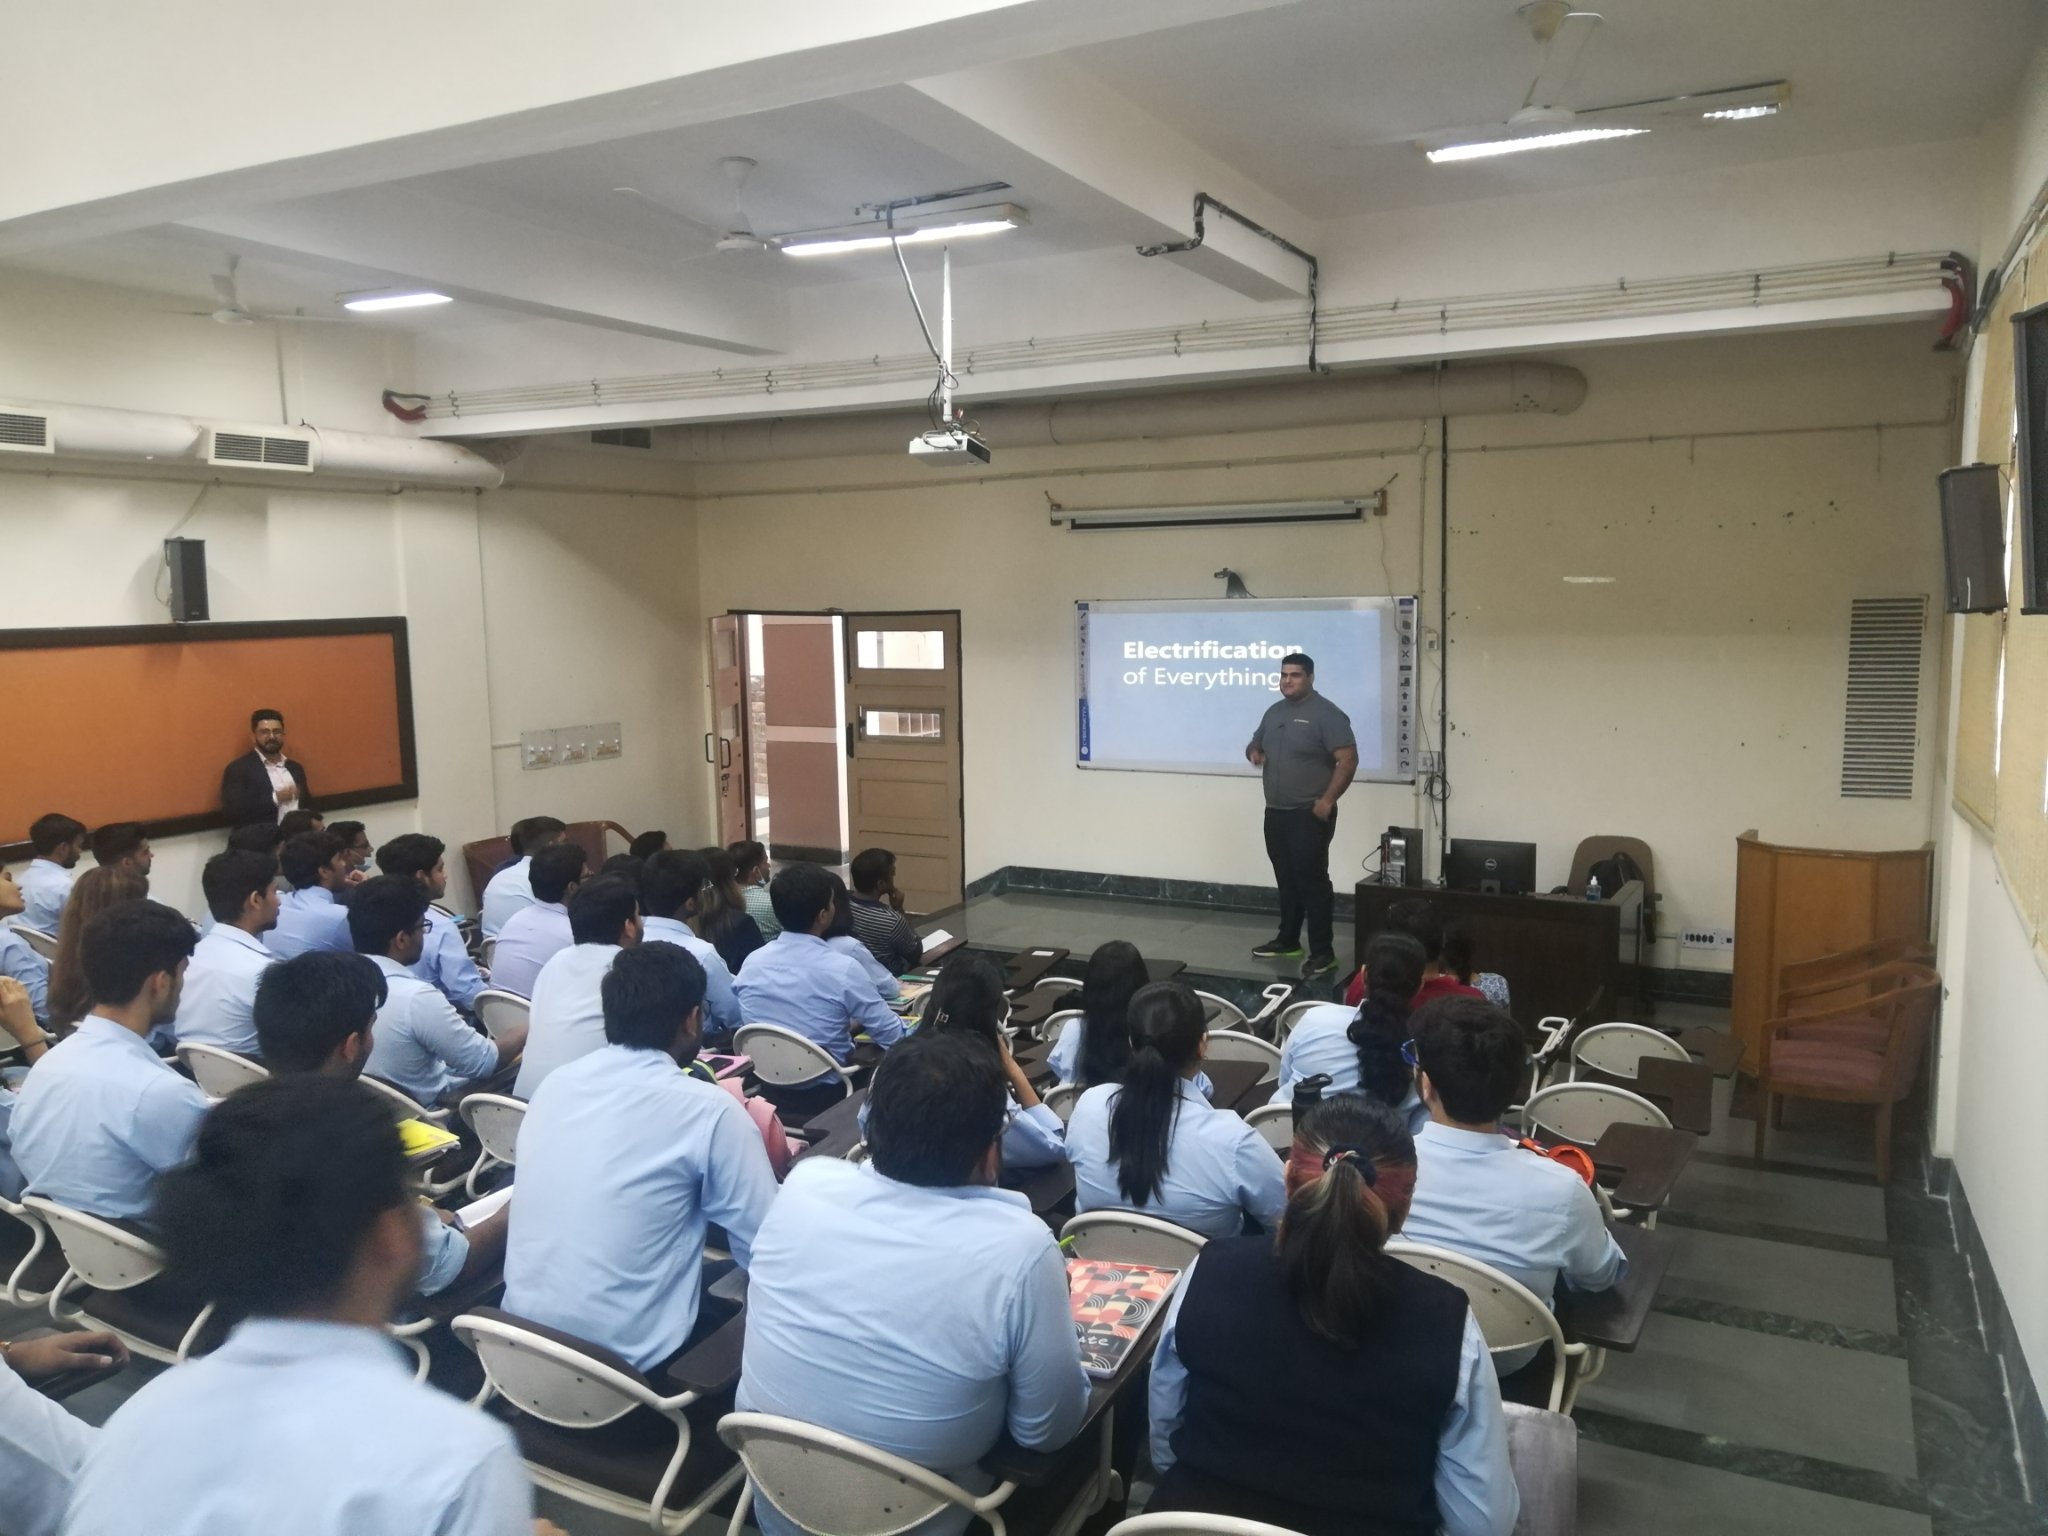 Dr. Dhruv Chandel, an expert from Mathworks gave a lecture on “MATLAB and its Industrial Applications” on 23rd Aug 2022.